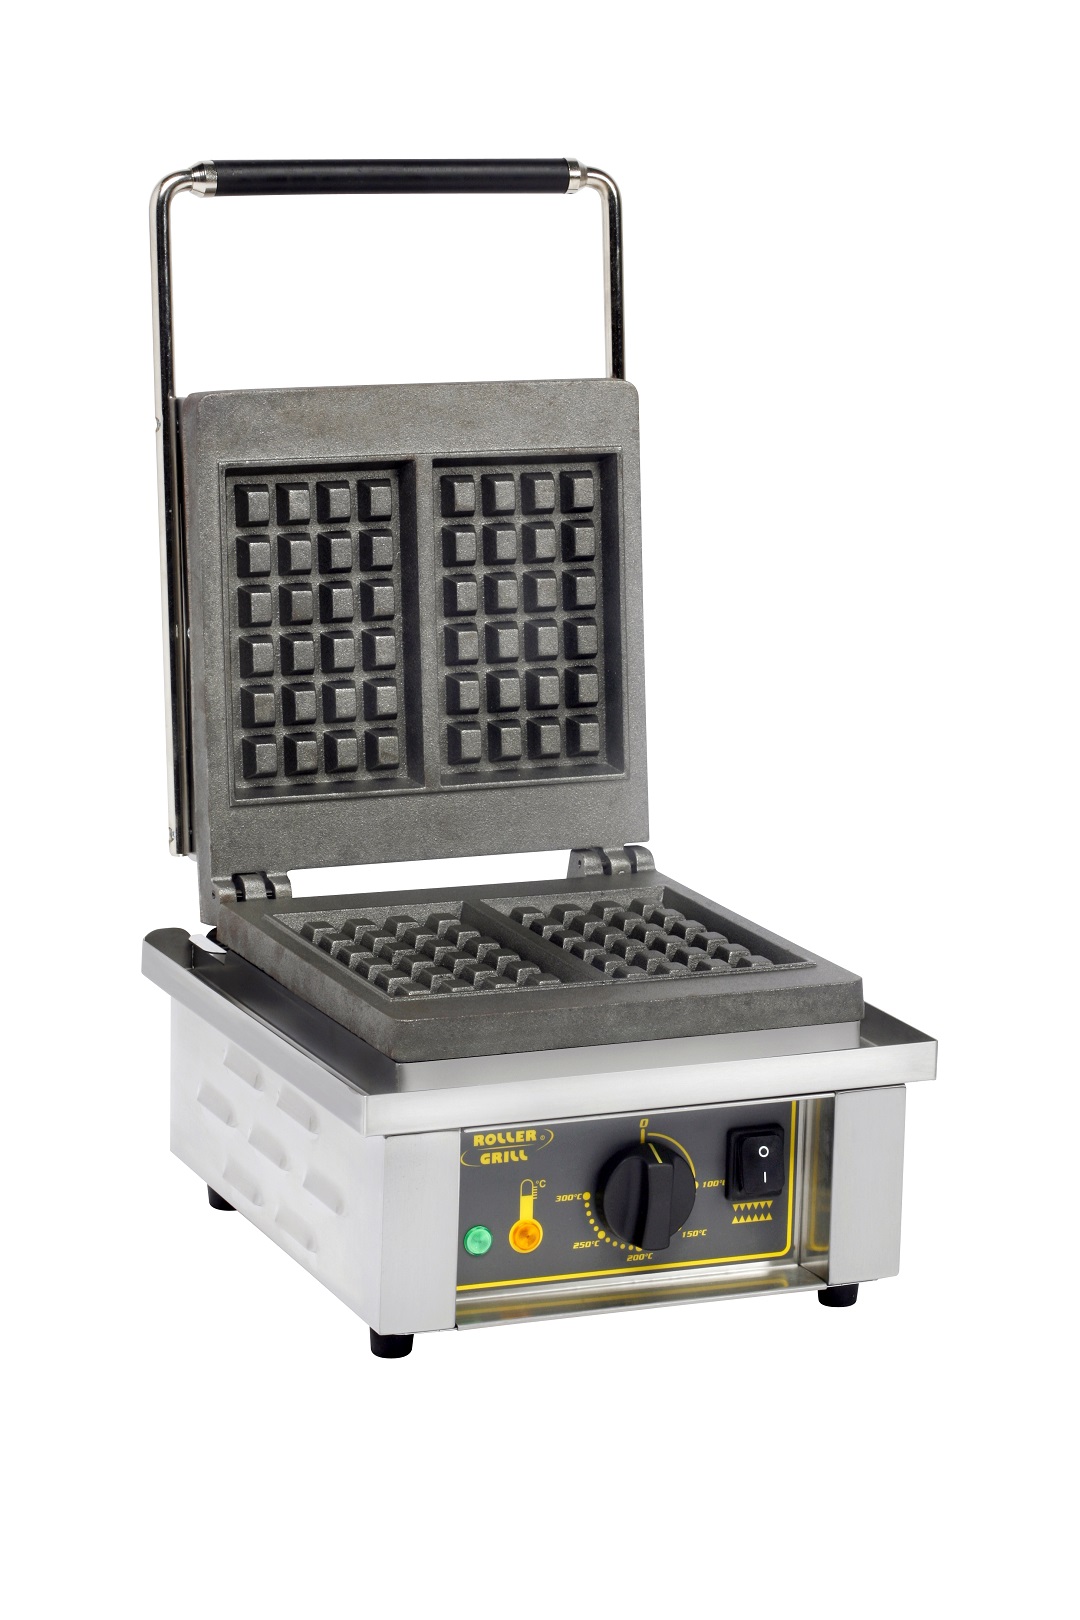 Roller Grill GES 20 Liege Waffle Iron